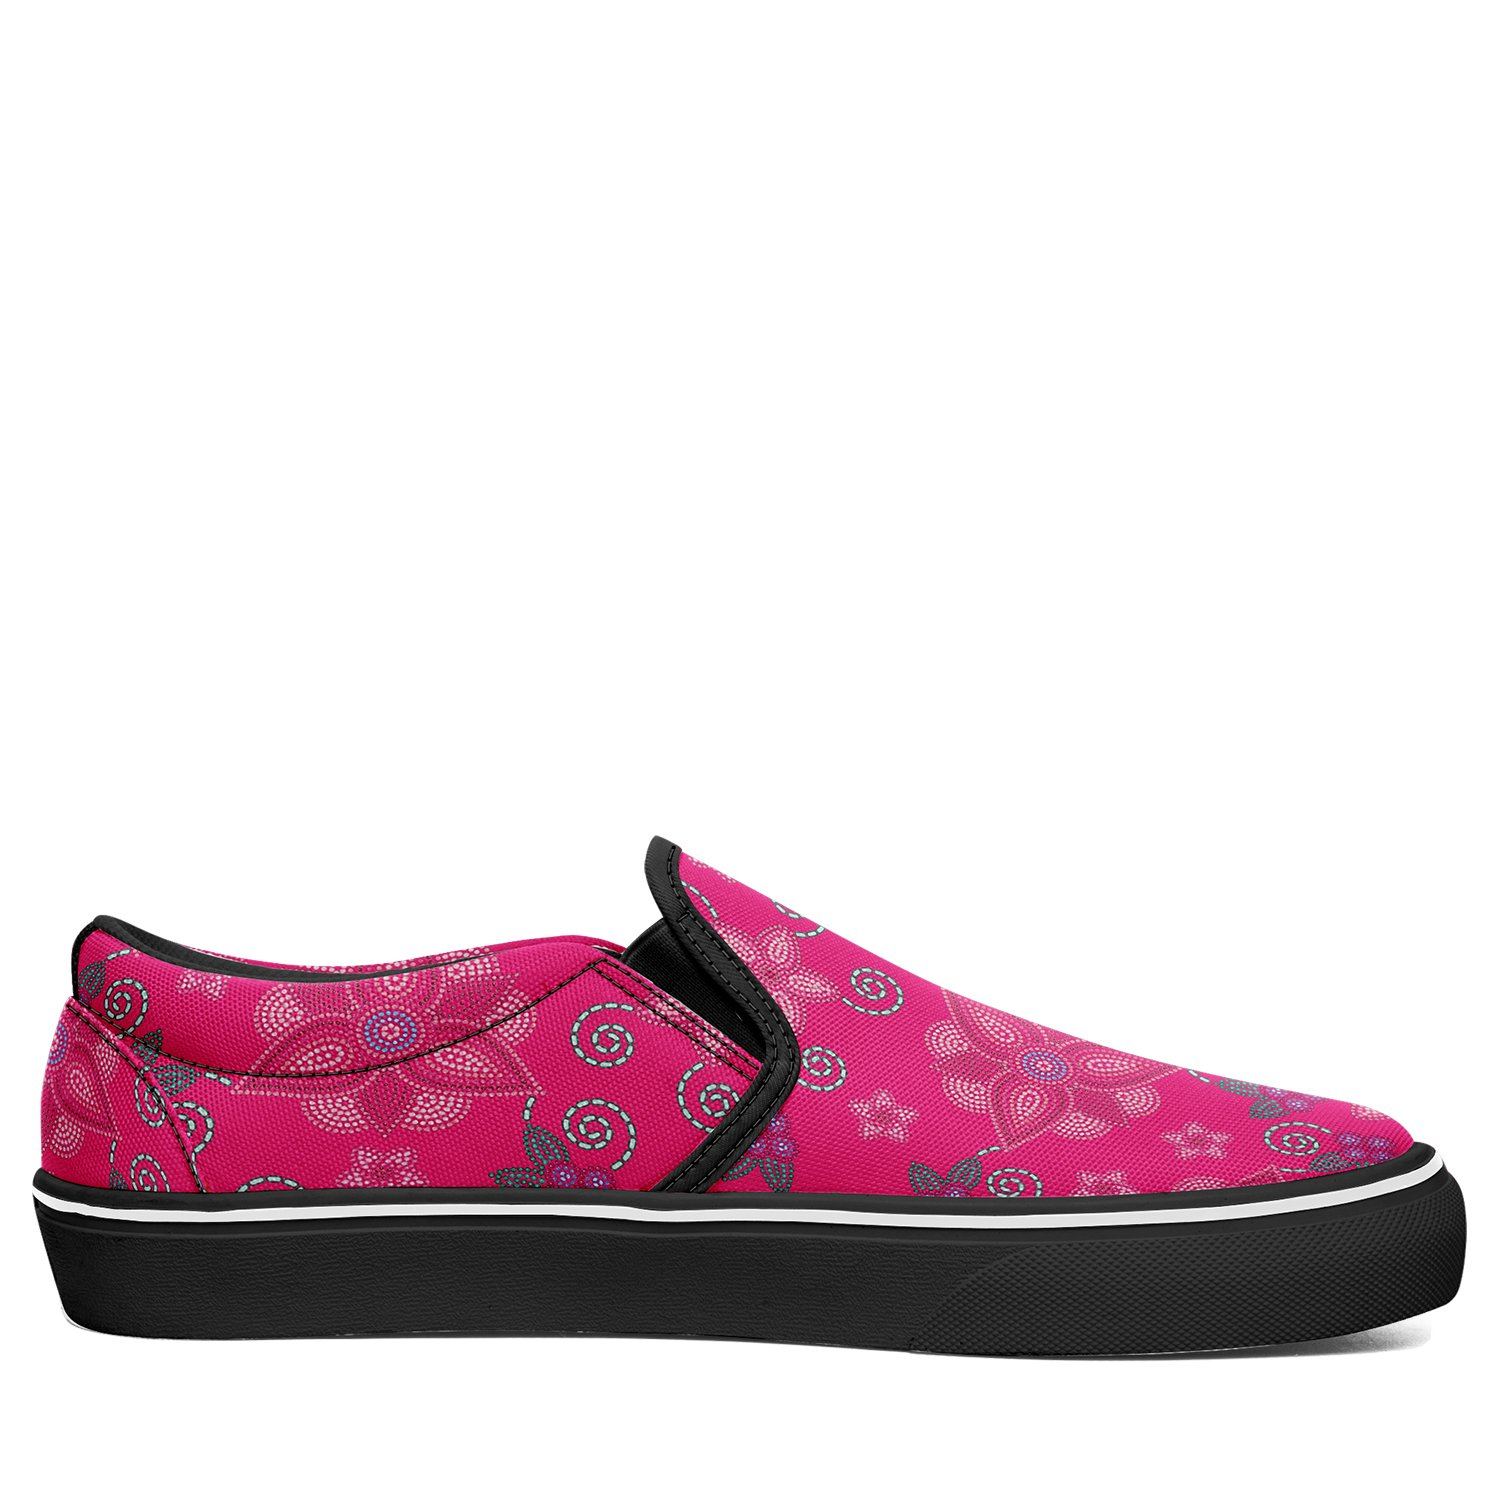 Otoyimm Kids Canvas Slip On Shoes